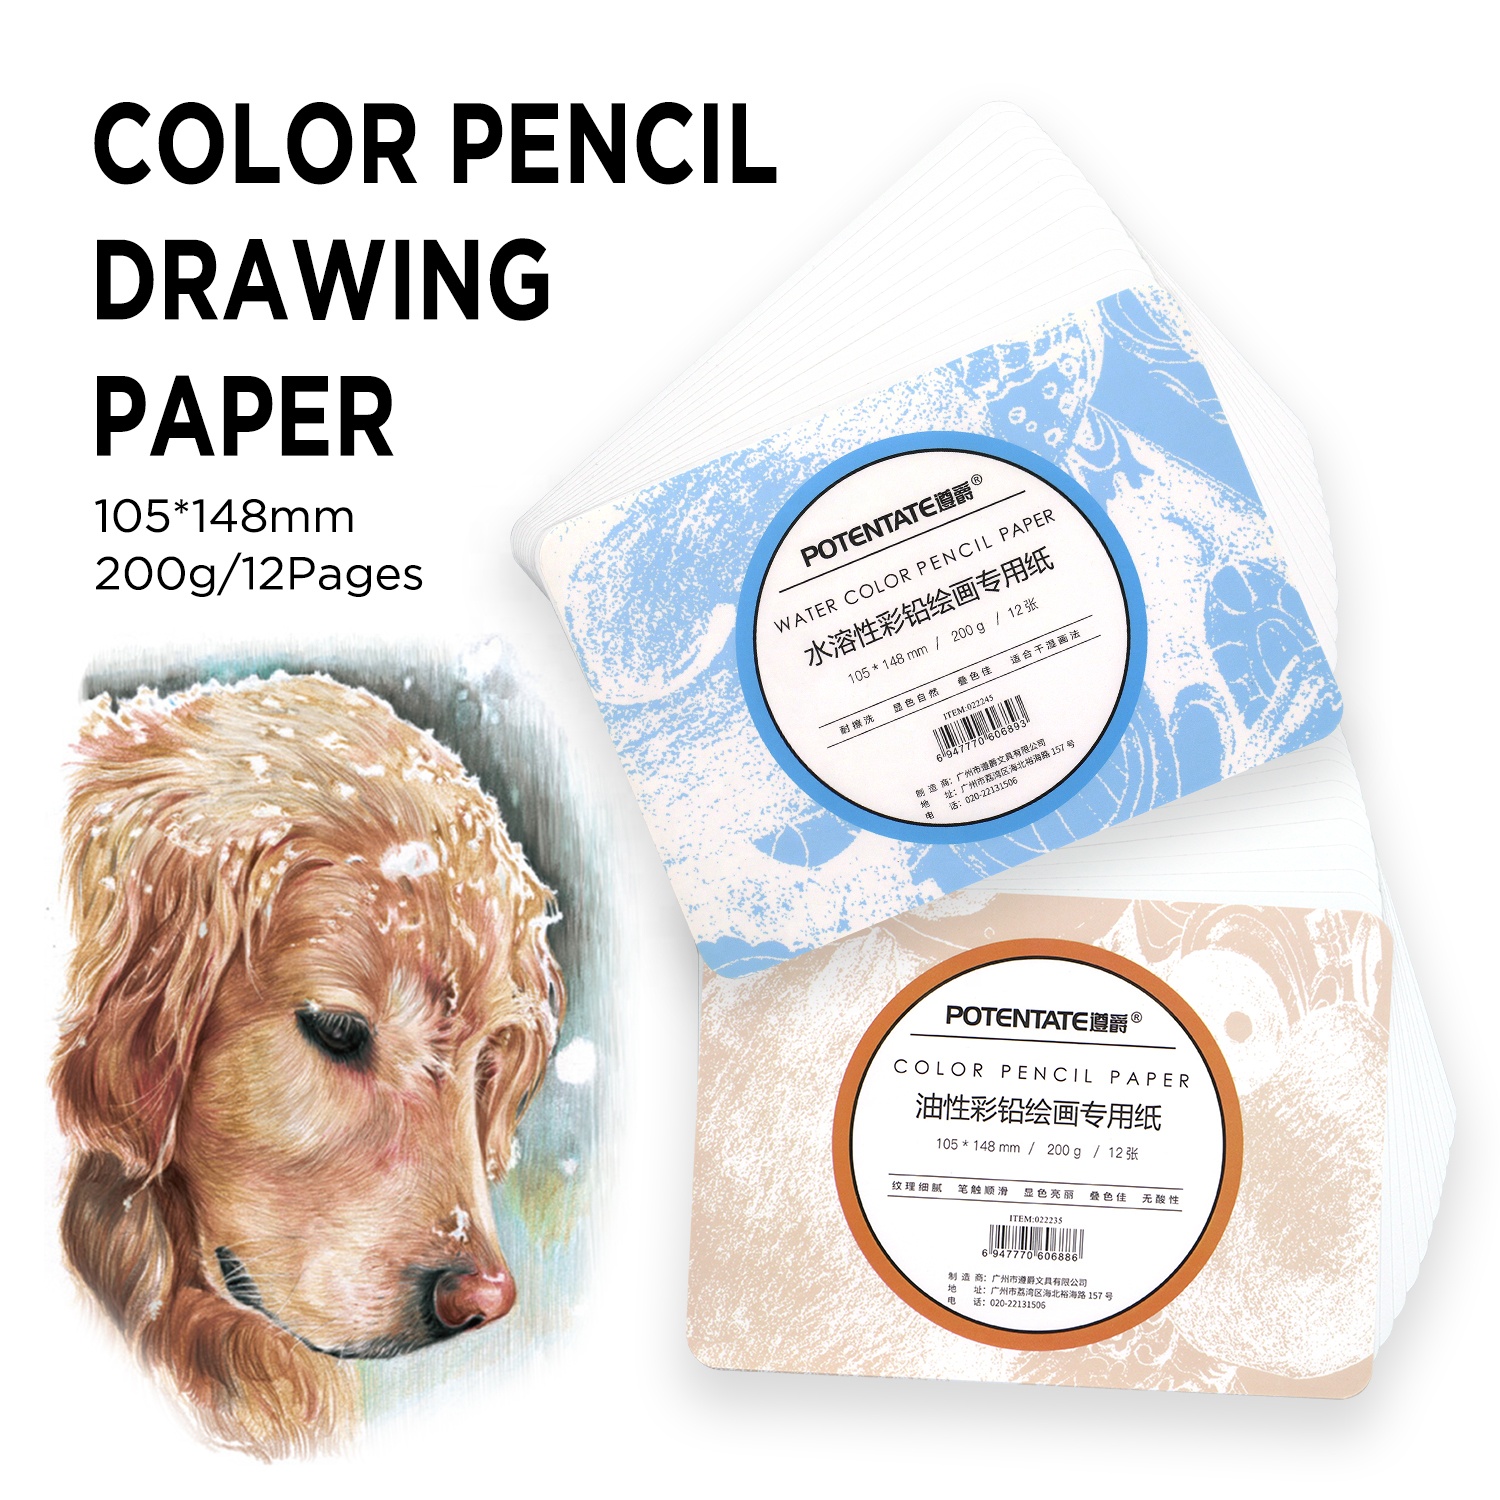 POTENTATE A6 premium sketch Drawing Paper For Oily color Pencil &water color pencil200GSM Paper pad/12 Pages1